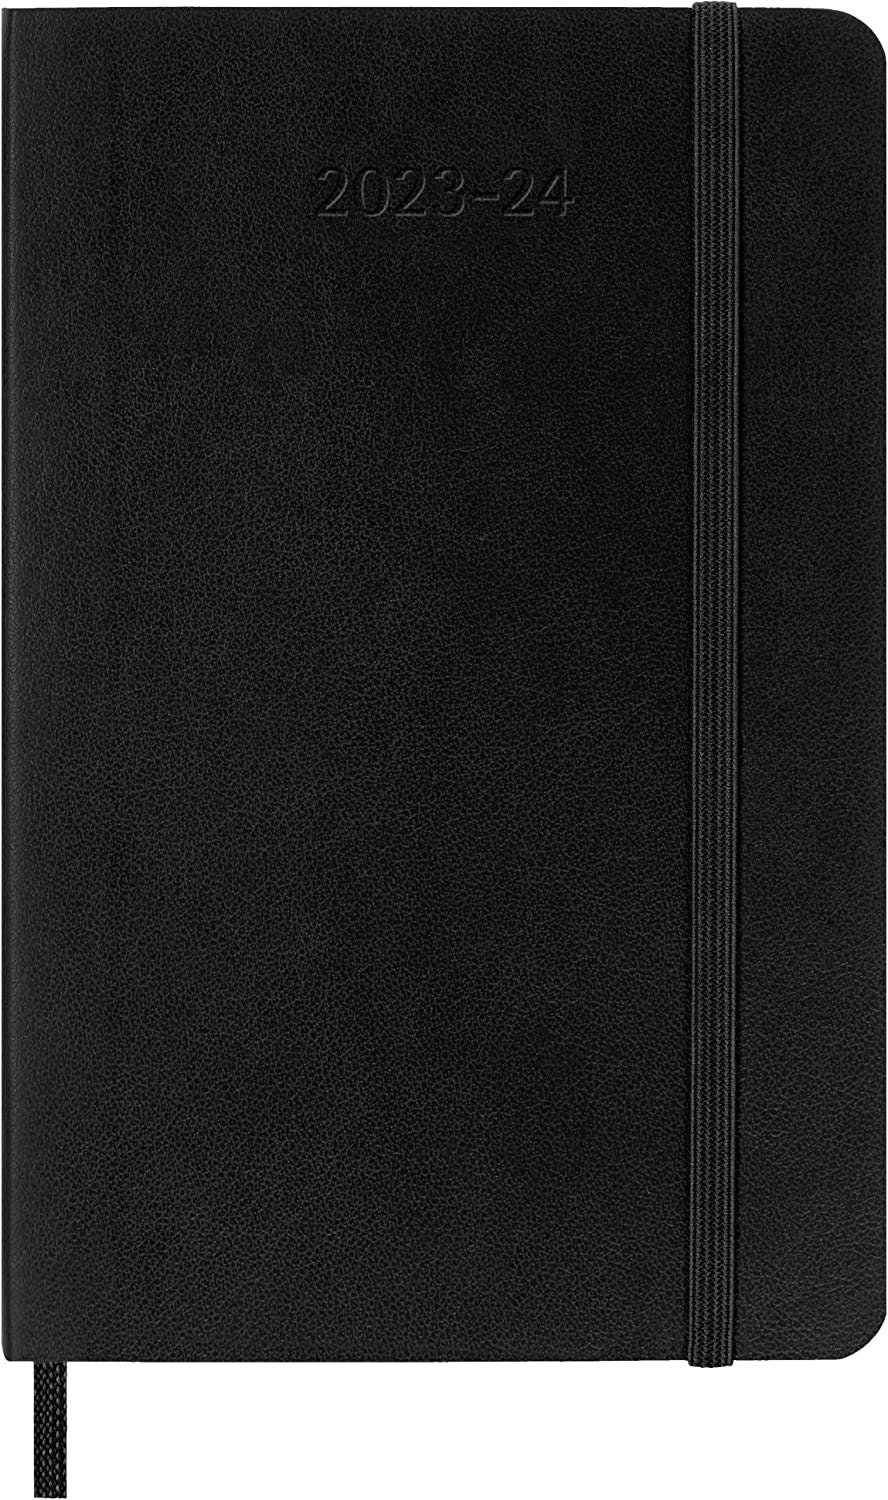 Moleskine 2023 / 2024 Diary 18-month Weekly 9 X 14cm Pocket Softcover Black  Weekly Planner Office Work School Home Organiser 